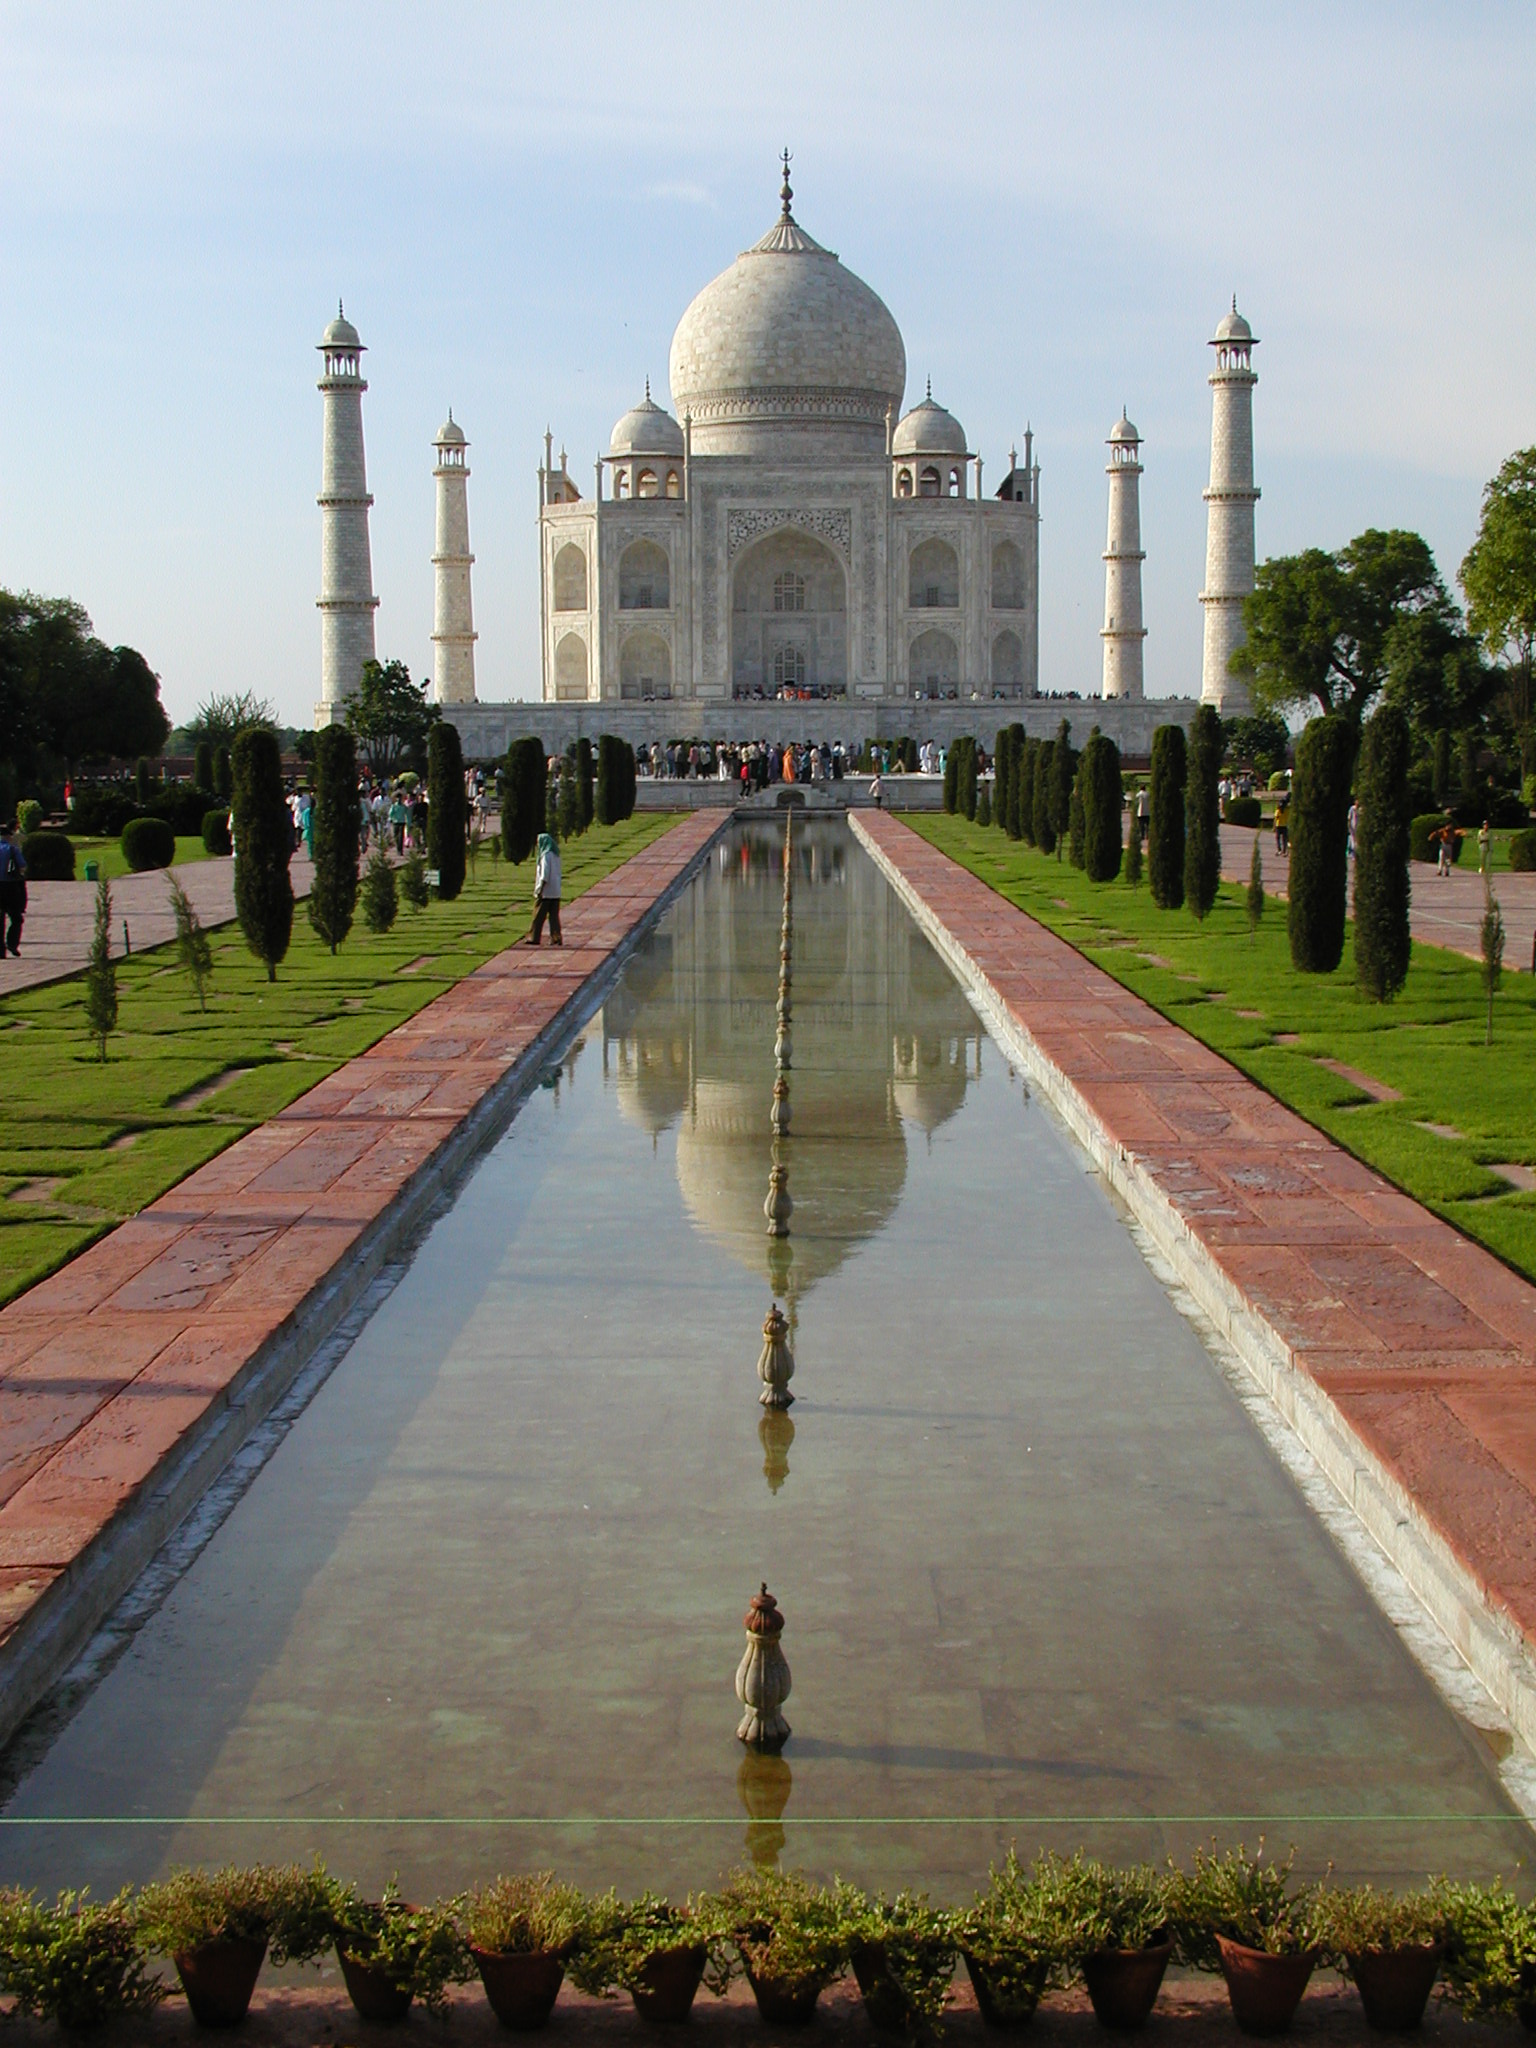 The pool in front of the Taj Mahal 